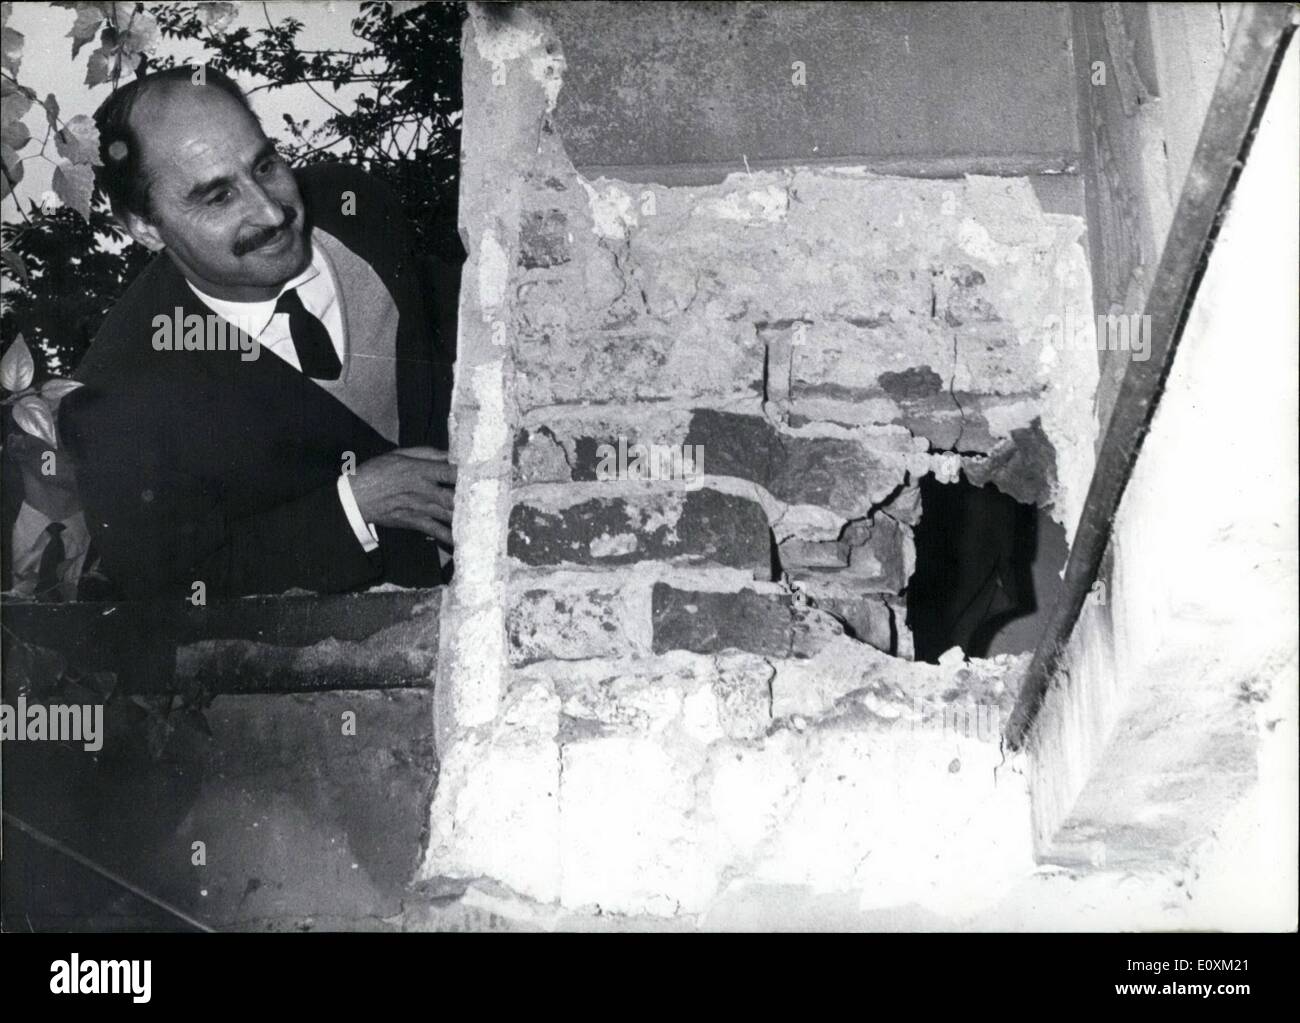 May 05, 1967 - In the nicht 24./25. May at 2.18 o'clock at plastic bomb exploded at the entrance of the Spanish embassy in Bonn, ''Schlob'' - Street No. 4. The bomb demolished the heavy oak door of the embassy. It snatched away an iron-grate and made an opening into a 26 centimetres thick house wall. The expansion of the explosion threw the Spanish porter Ramon de la Torre out of his bed. The employee of the embassy, Mario Clari, got off with a fright. Photo shows the Spanish employee of the embassy, Ramon de la Torre. Stock Photo